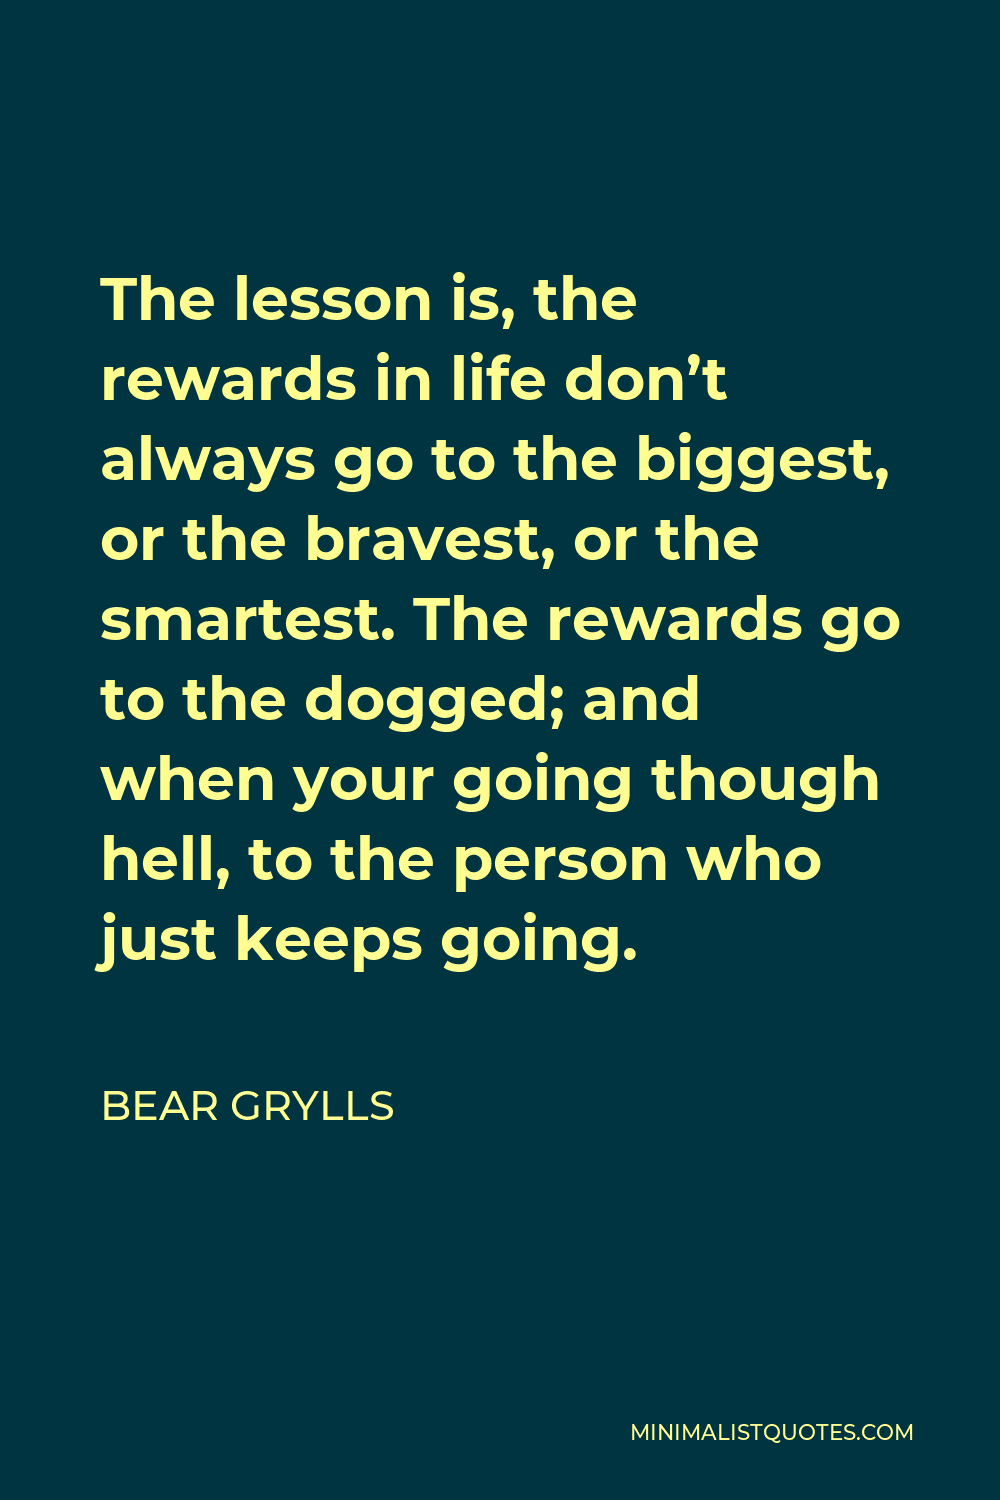 Bear Grylls Quote - The lesson is, the rewards in life don’t always go to the biggest, or the bravest, or the smartest. The rewards go to the dogged; and when your going though hell, to the person who just keeps going.